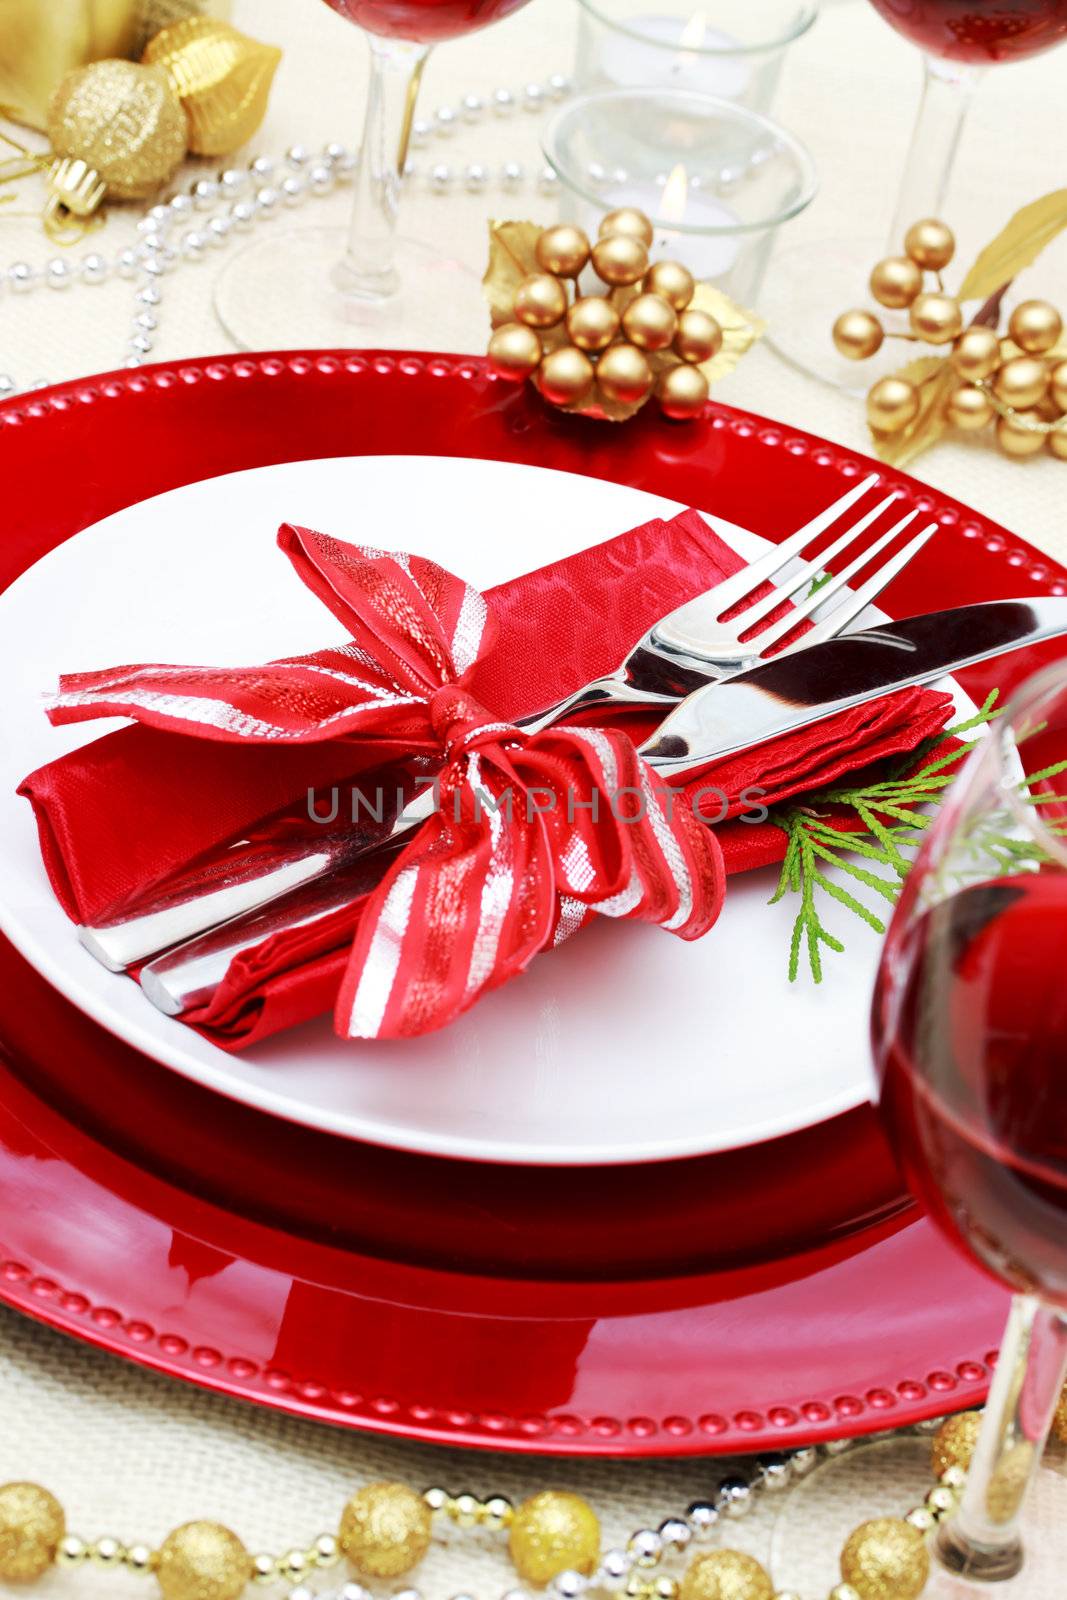 Decorated Christmas Dinner Table Setting 